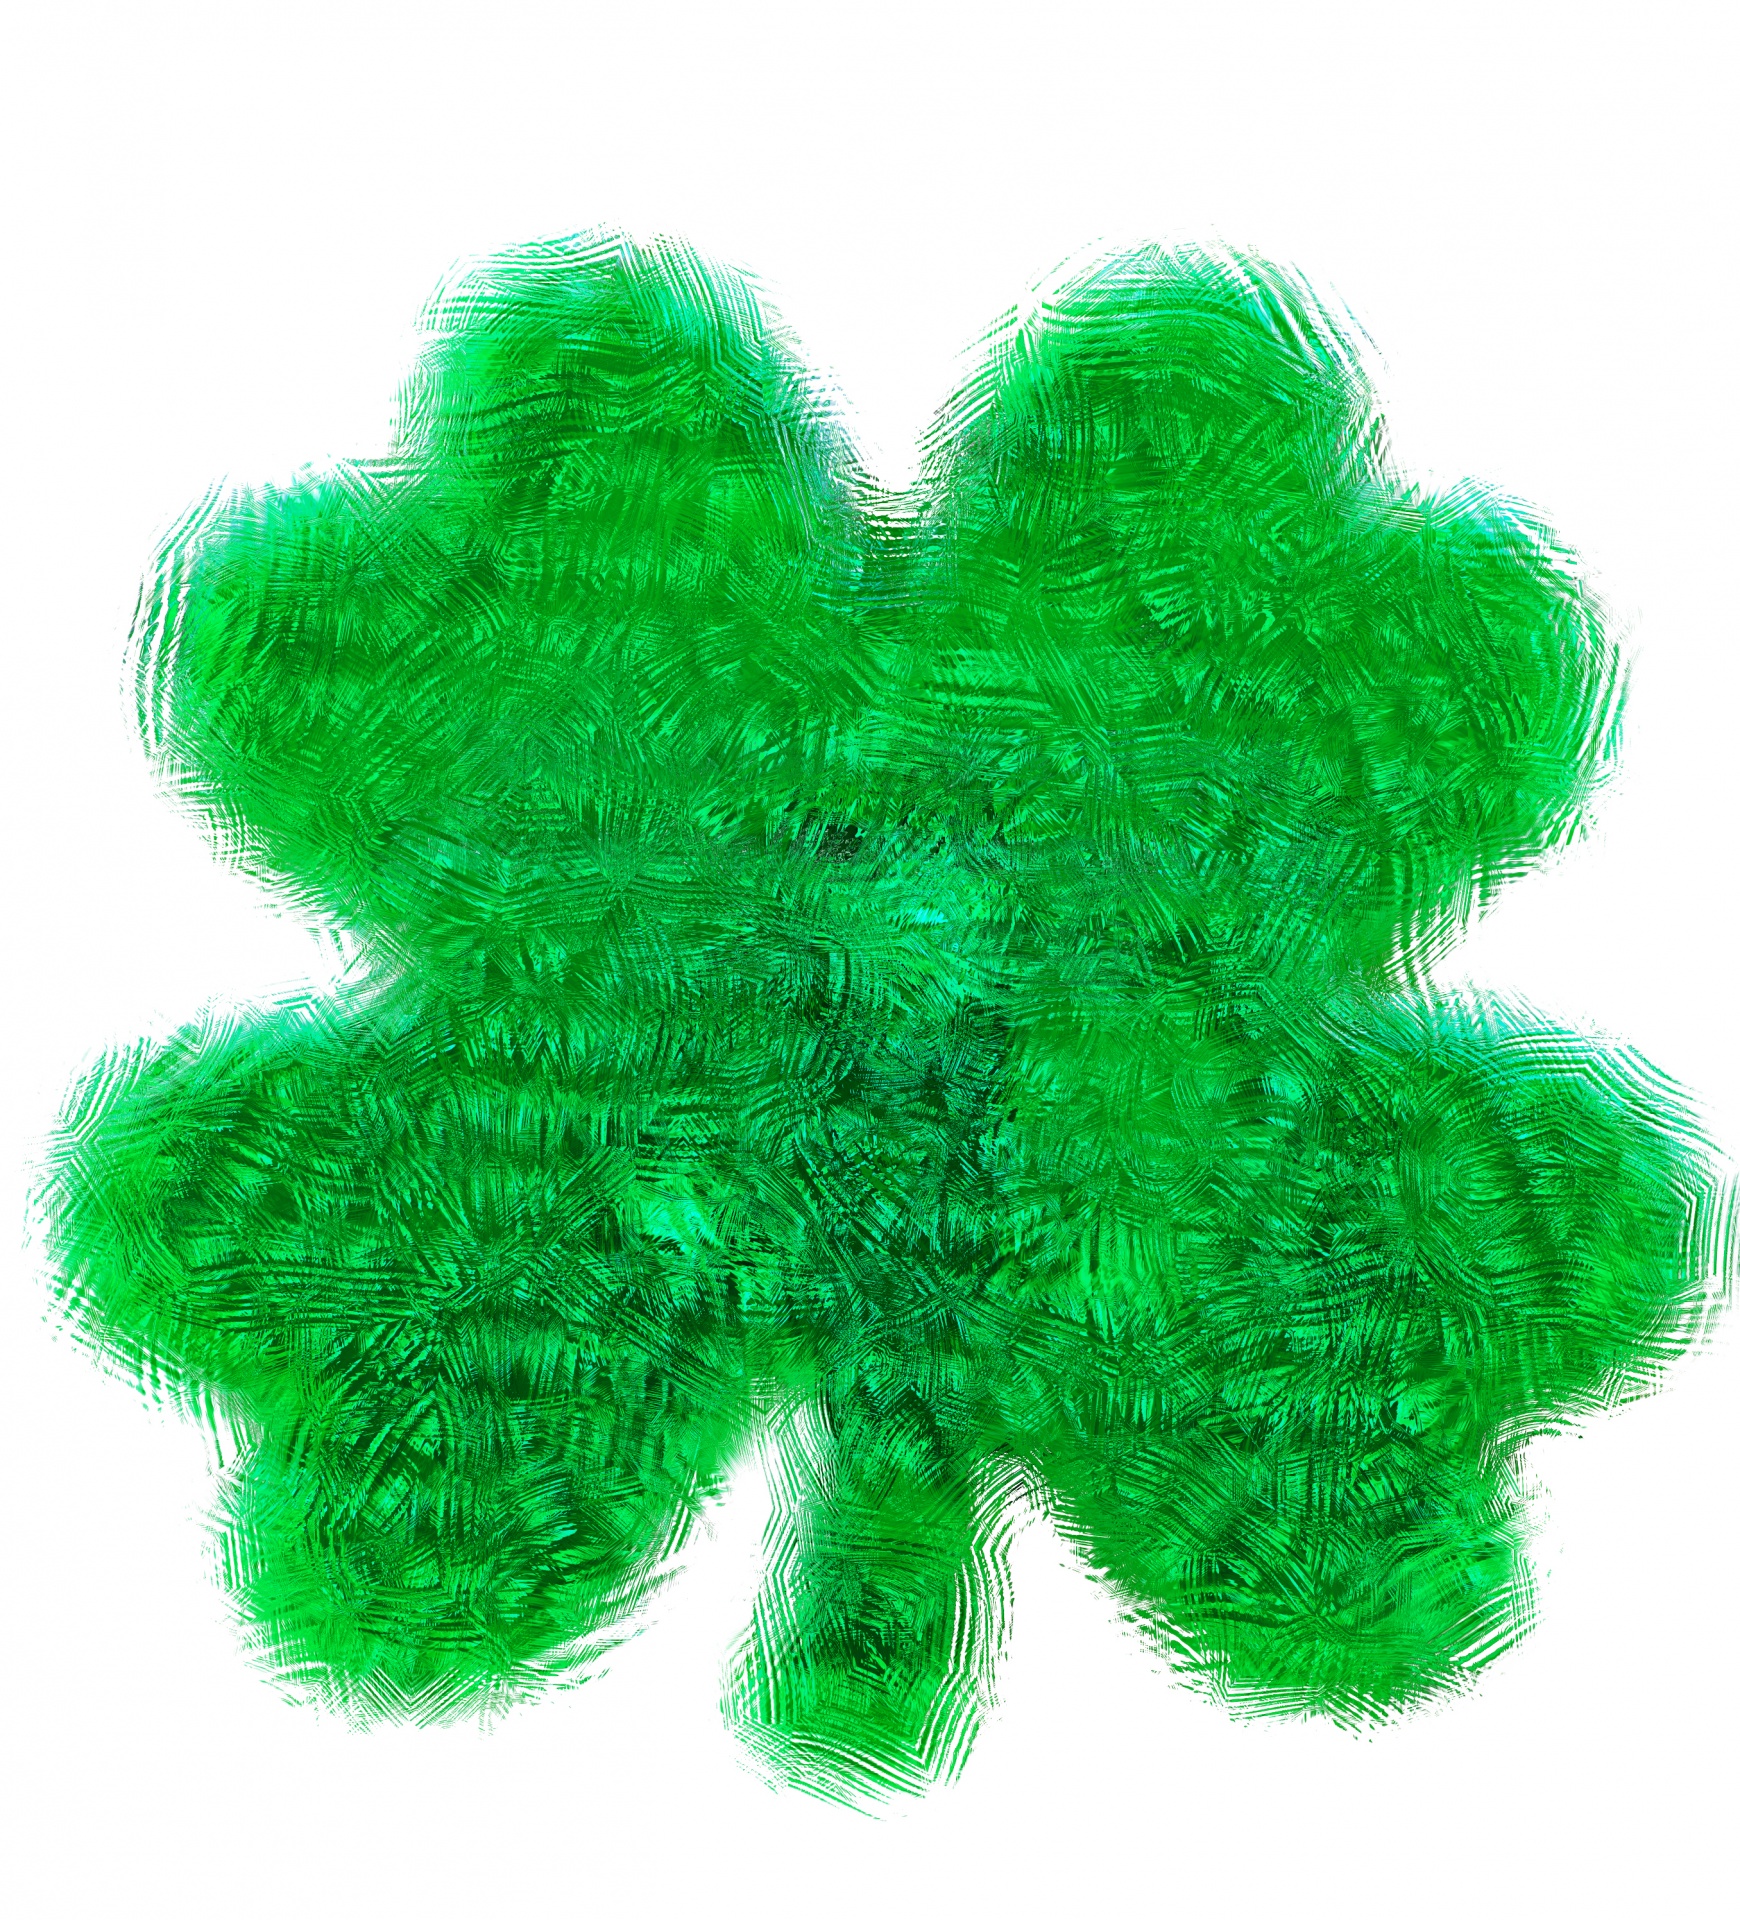 Abstract Four Leaf Clover